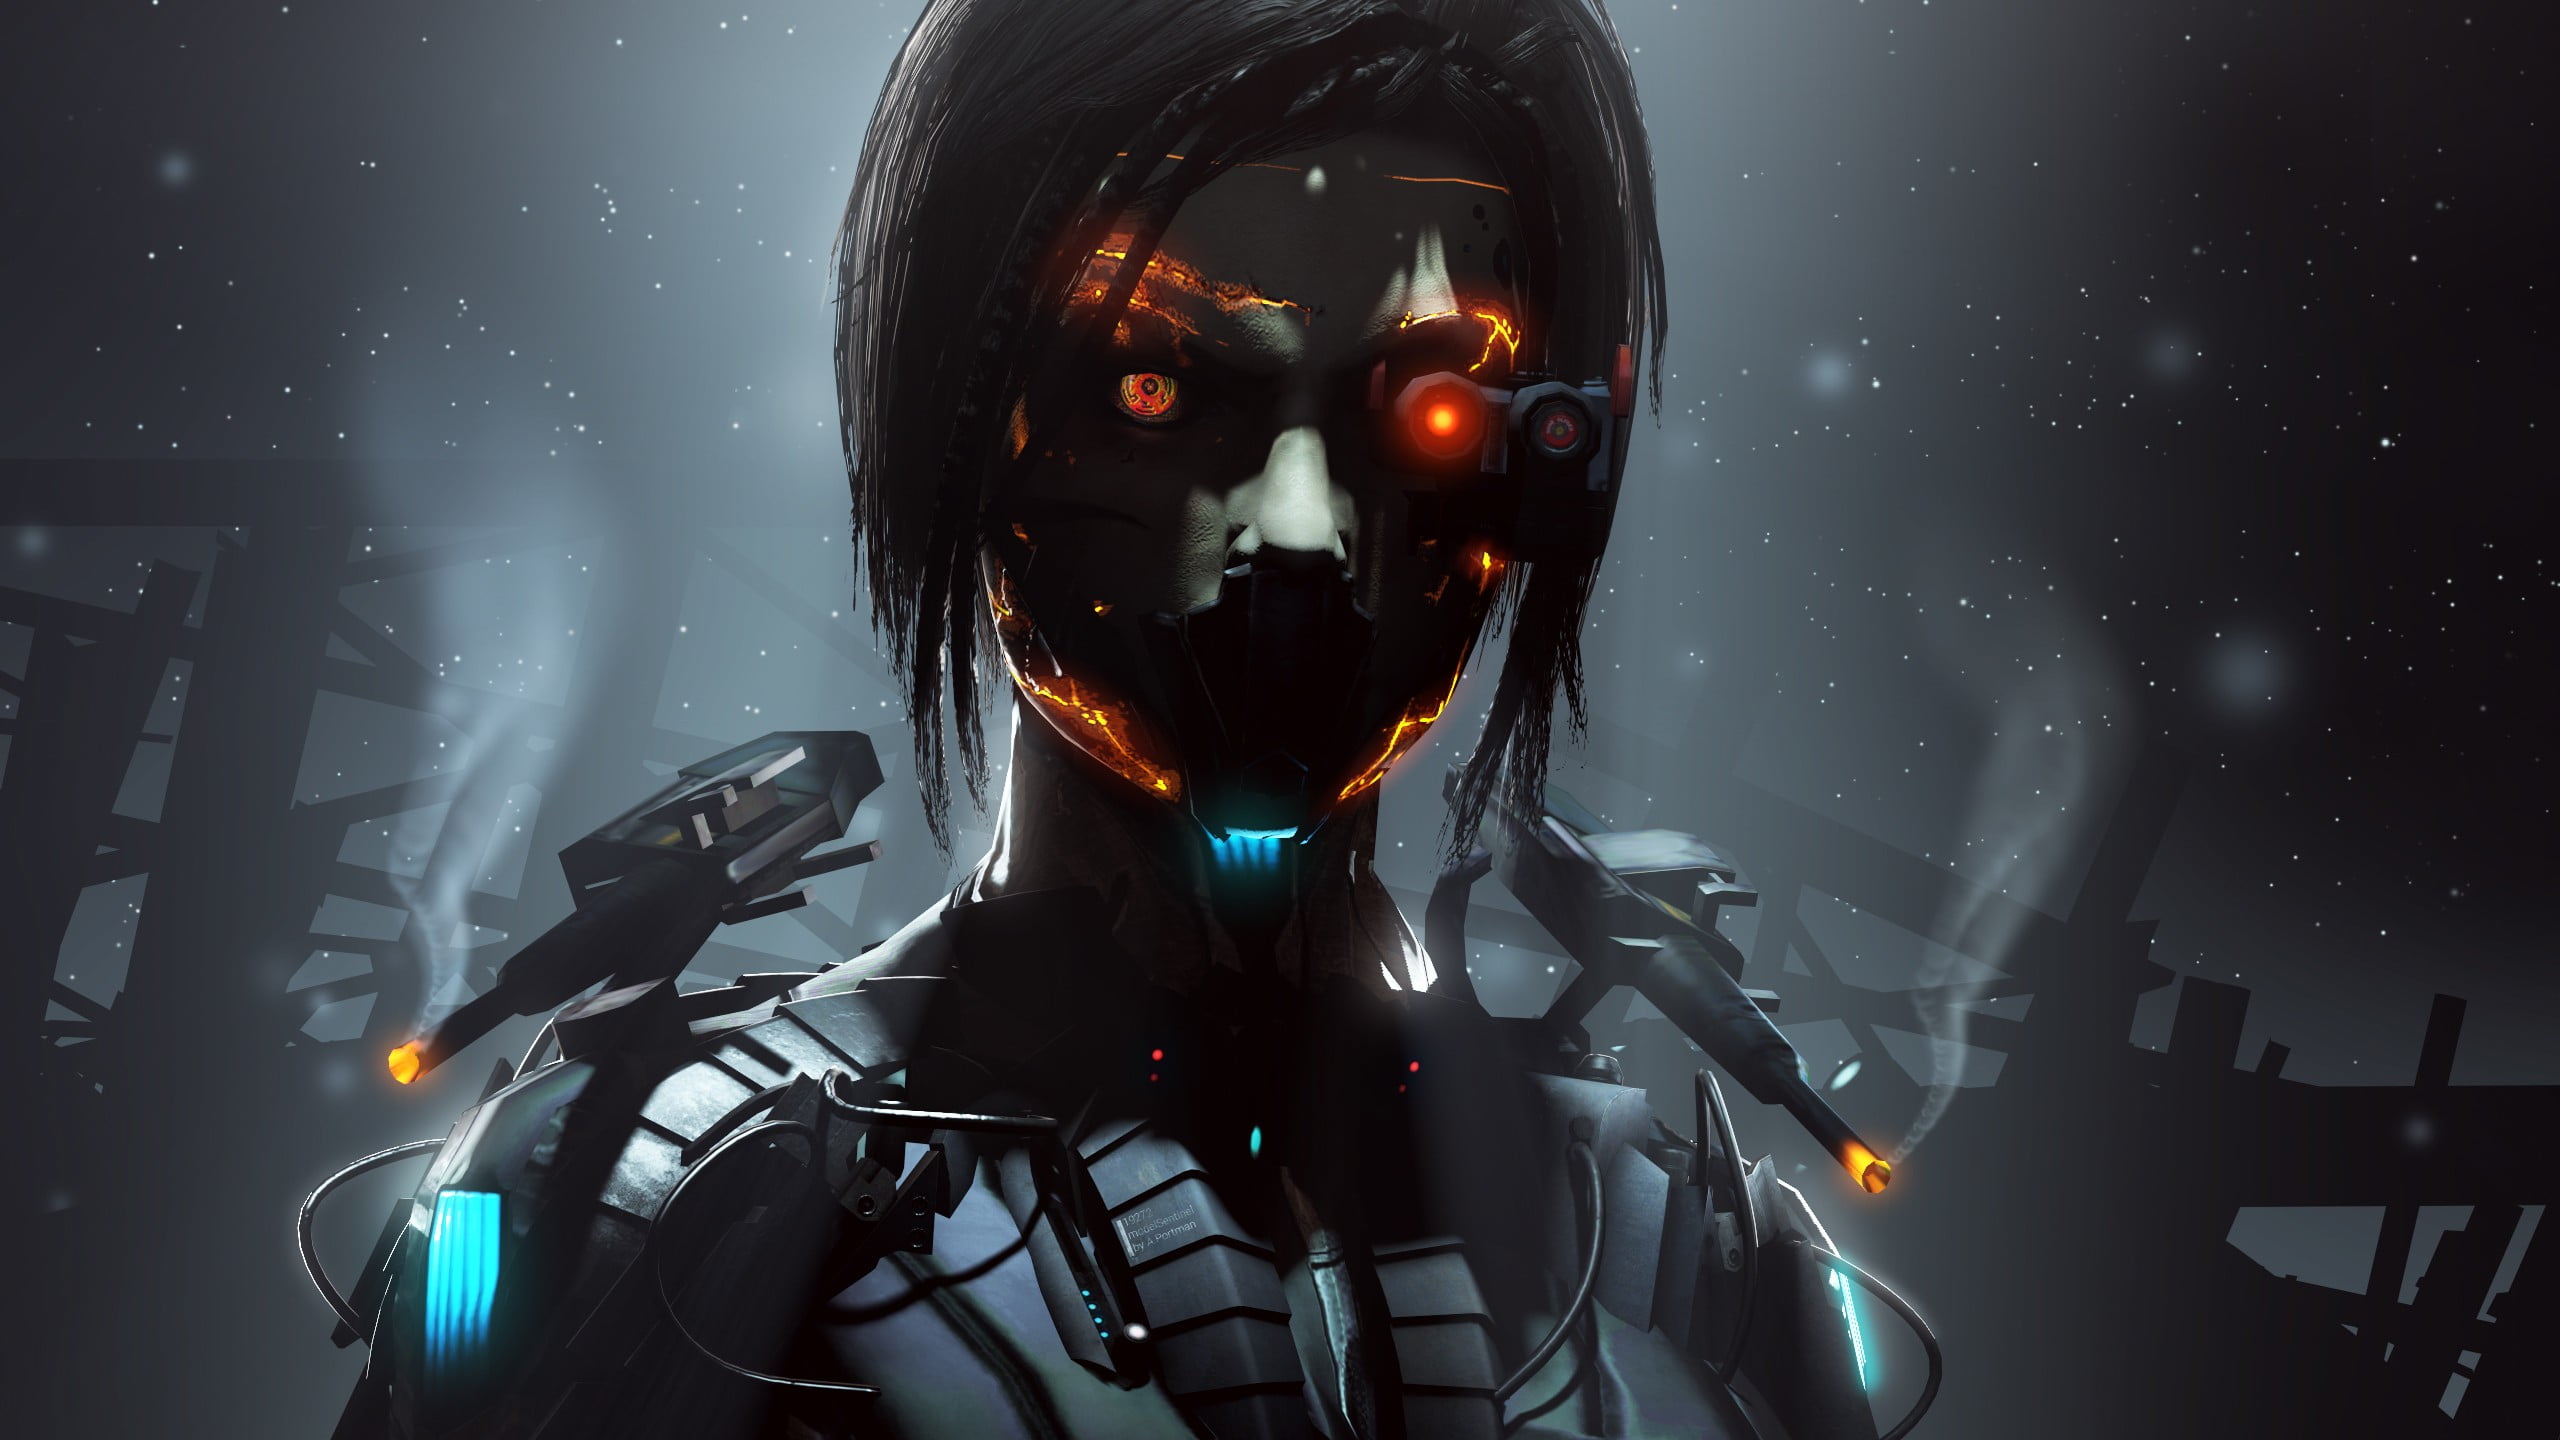 robotic woman with laser cannons graphic illustration